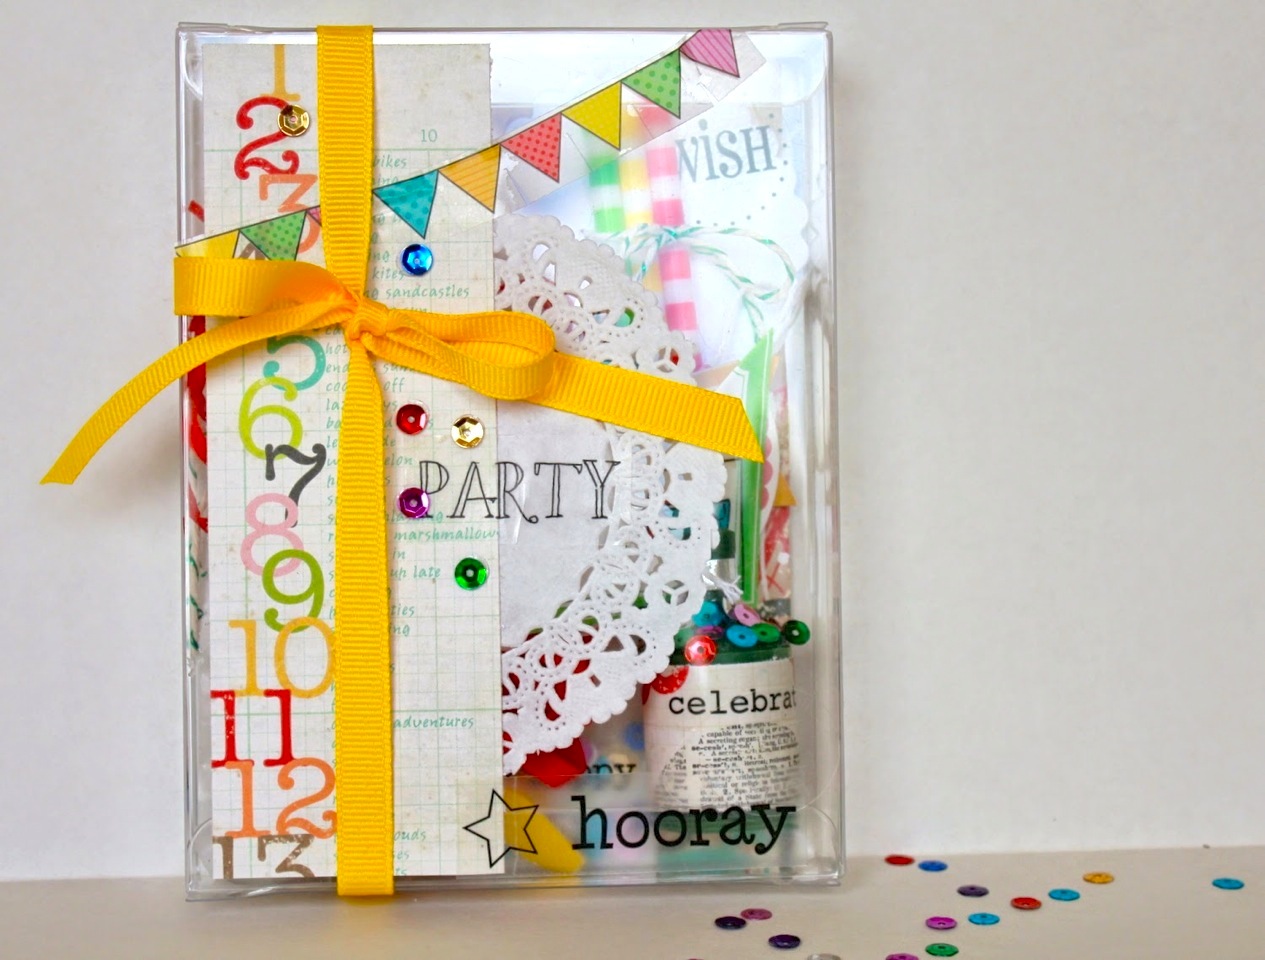 SRM Stickers Blog - Bitty Birthday Box by Shantaie - #birthday #gift #container #clear #A-2 #doily #stickers #twine #shimmer